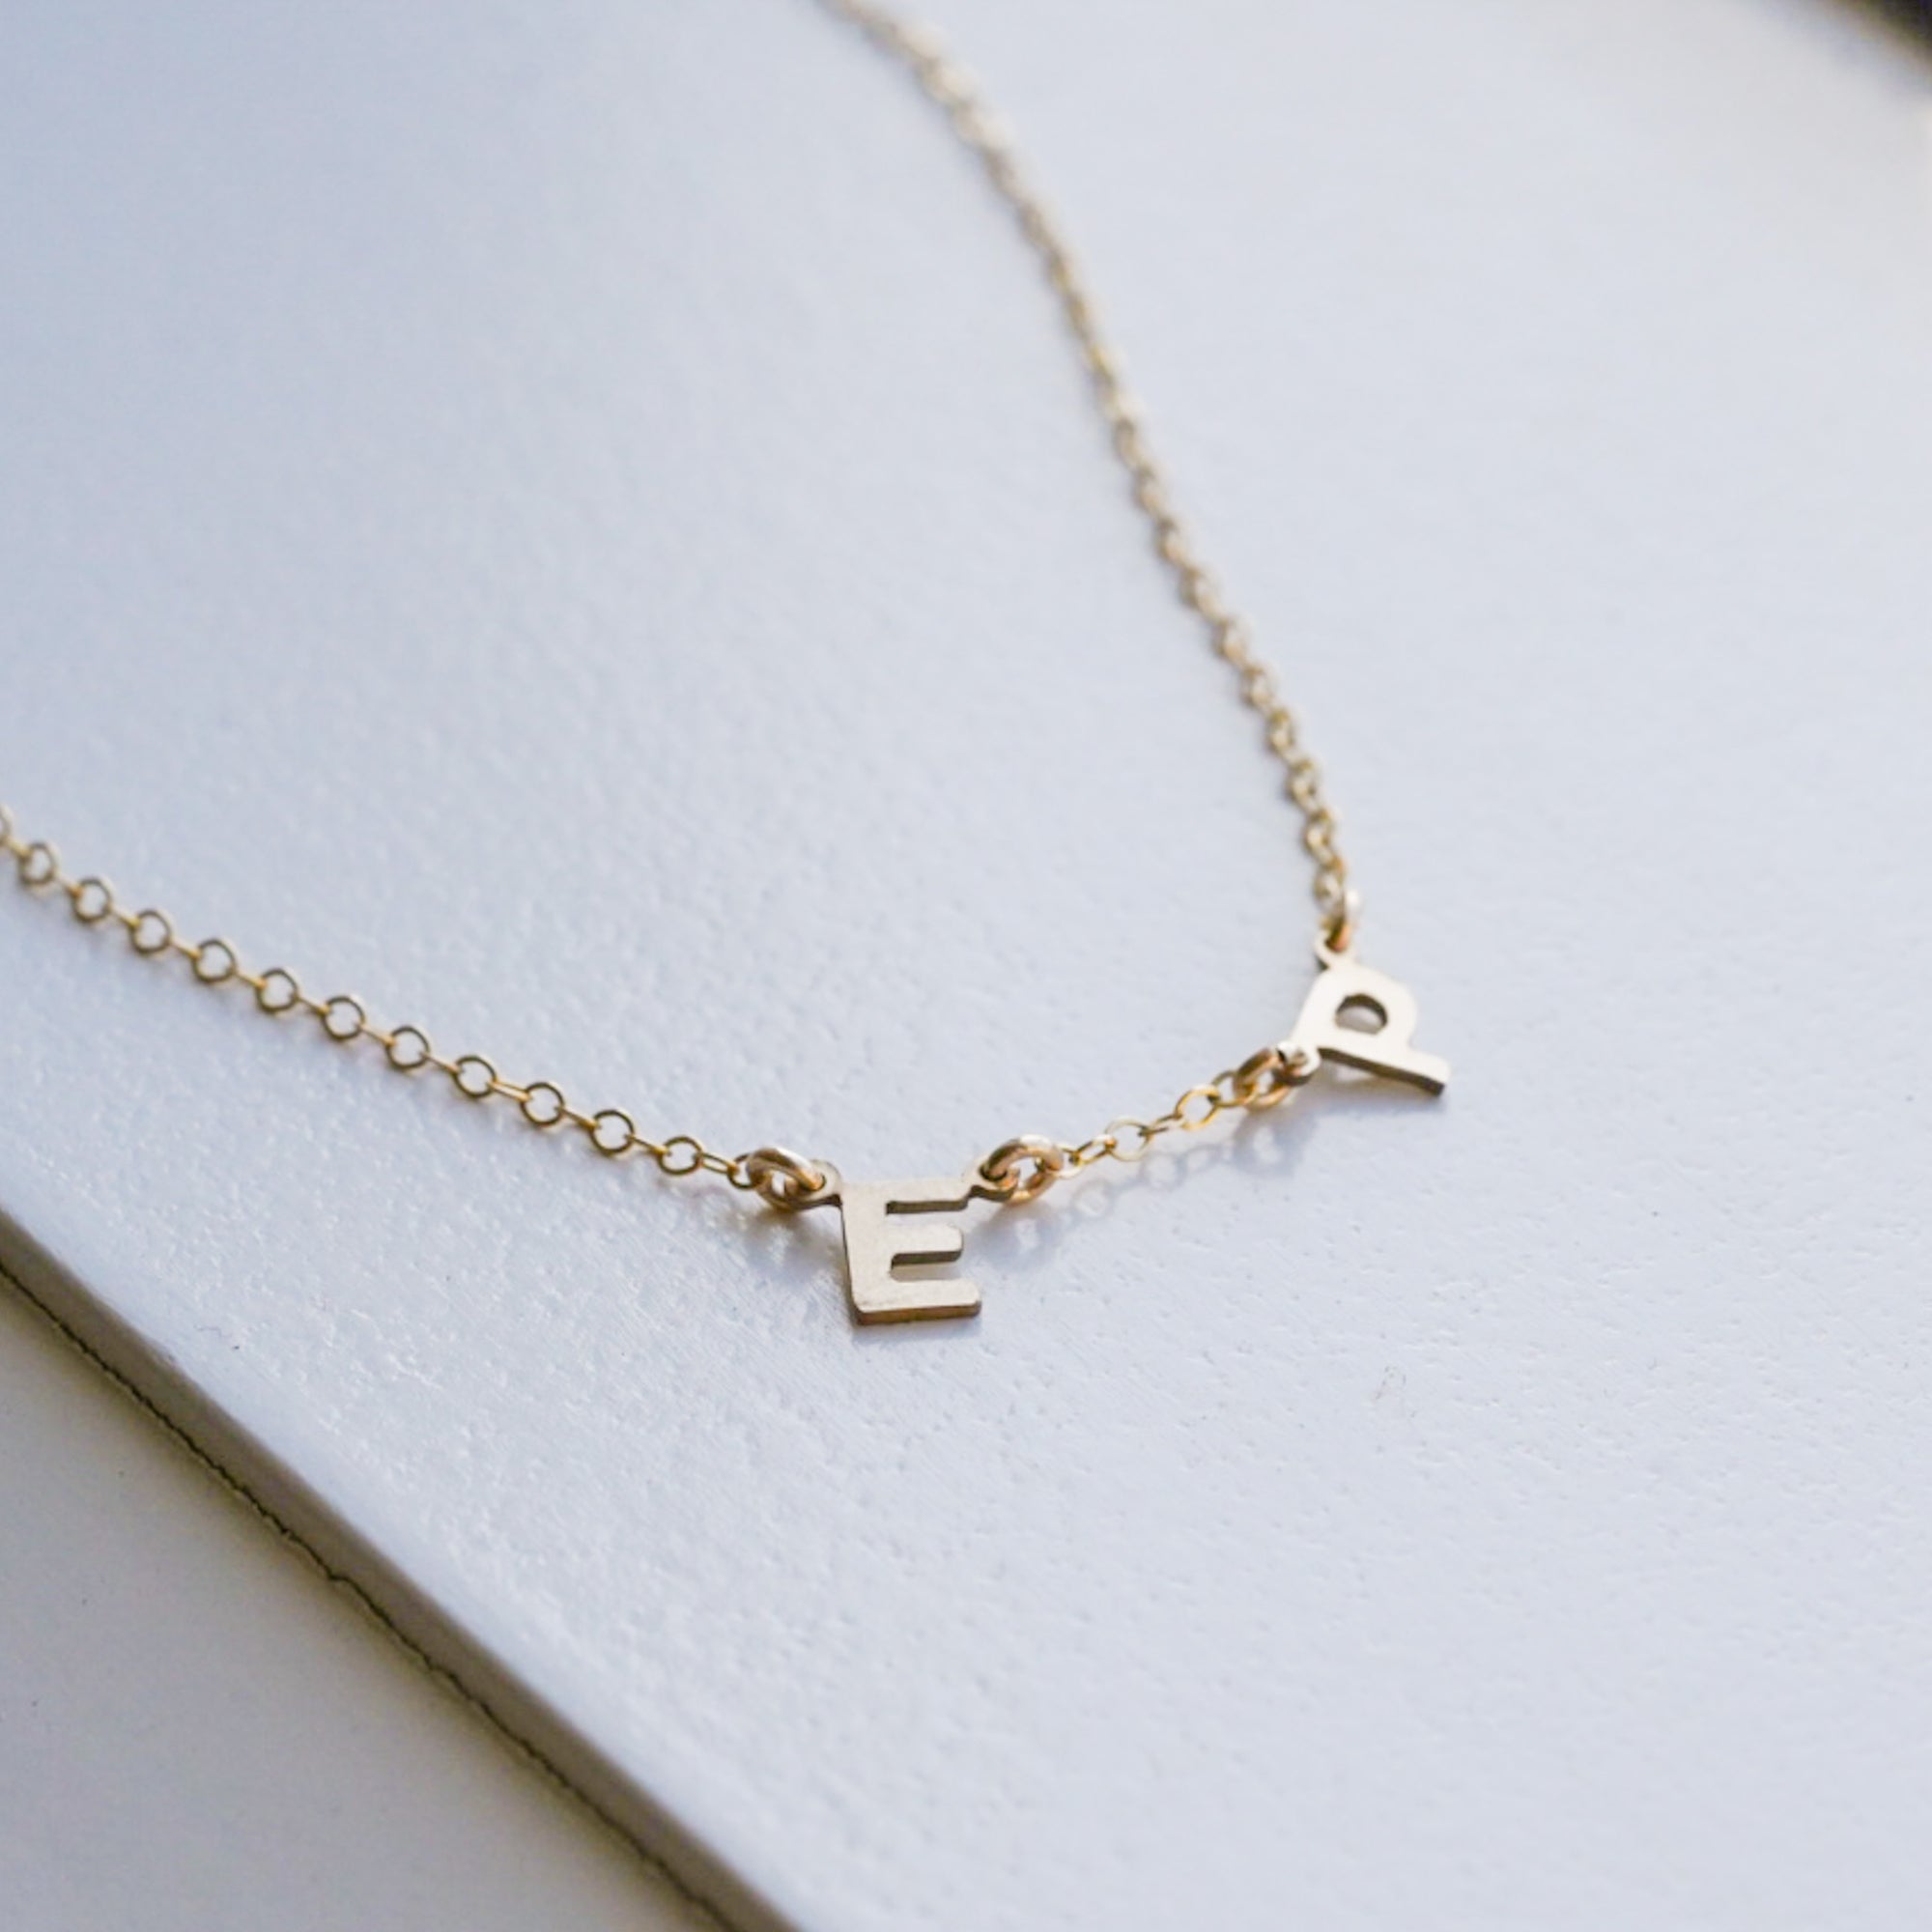 Double Love Letters Necklace - Uppercase